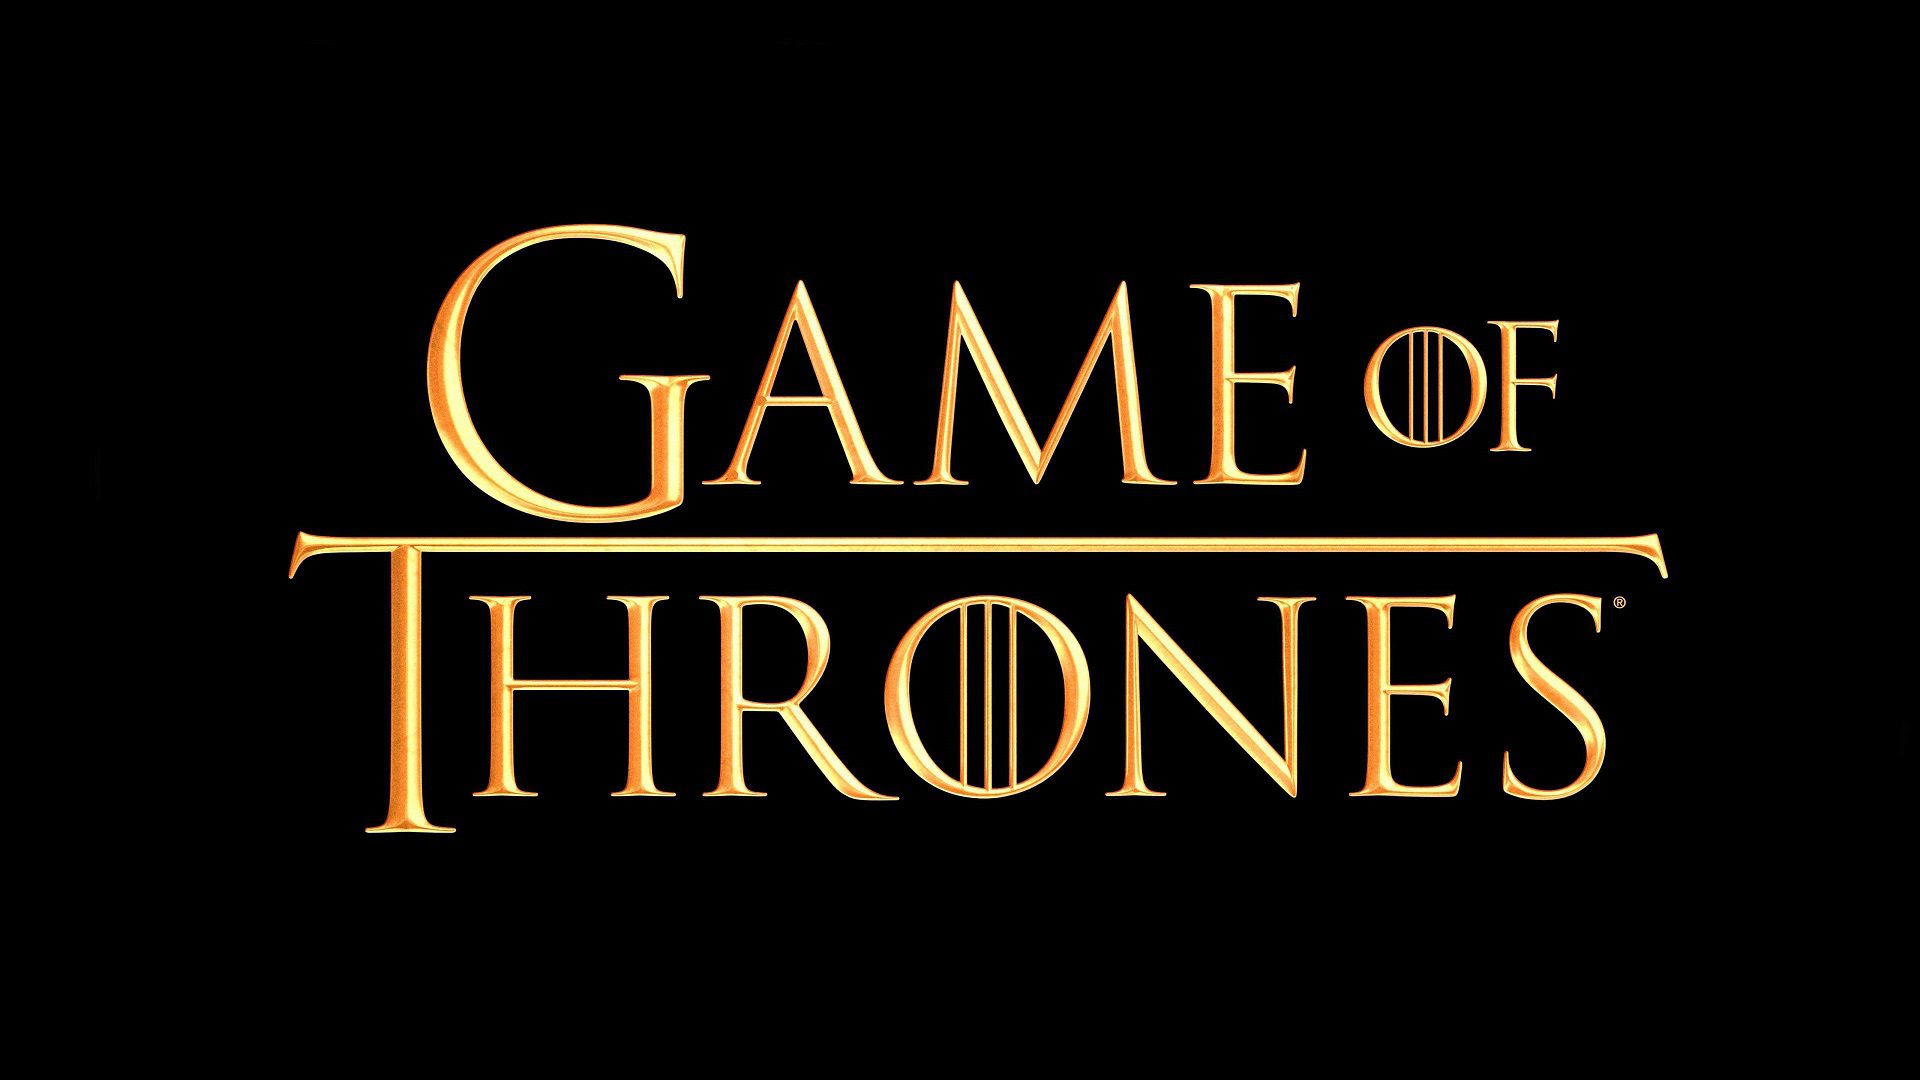 GAME OF THRONES SEASON 7 SOUNDTRACK Out Today digitally